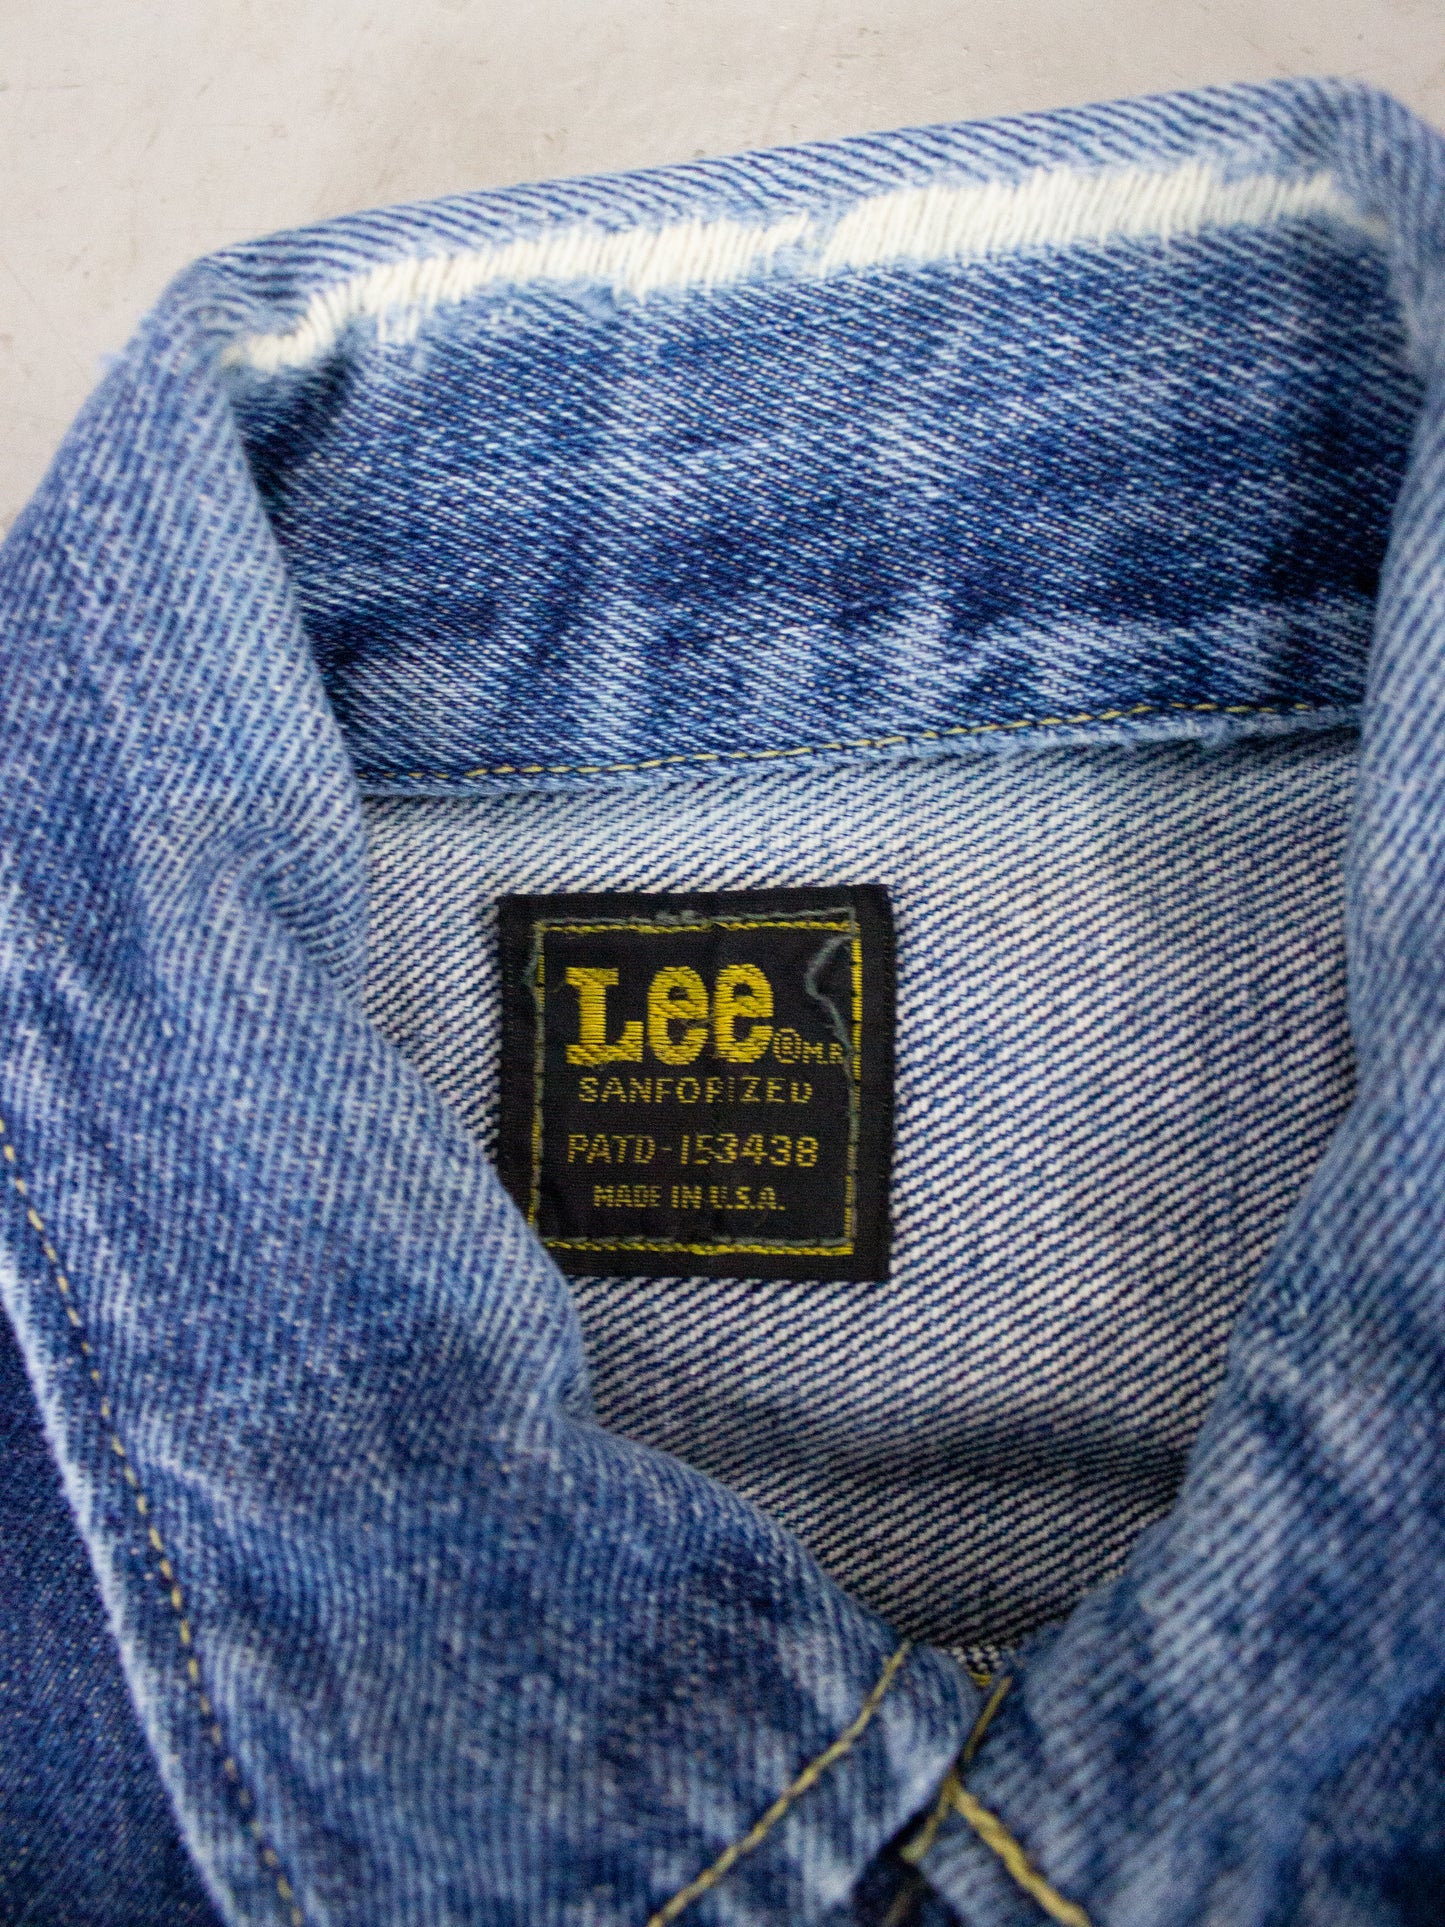 1970's Lee Riders Union Made Jean Jacket Made In USA Dark Wash PATD-153438 (Medium-Large)